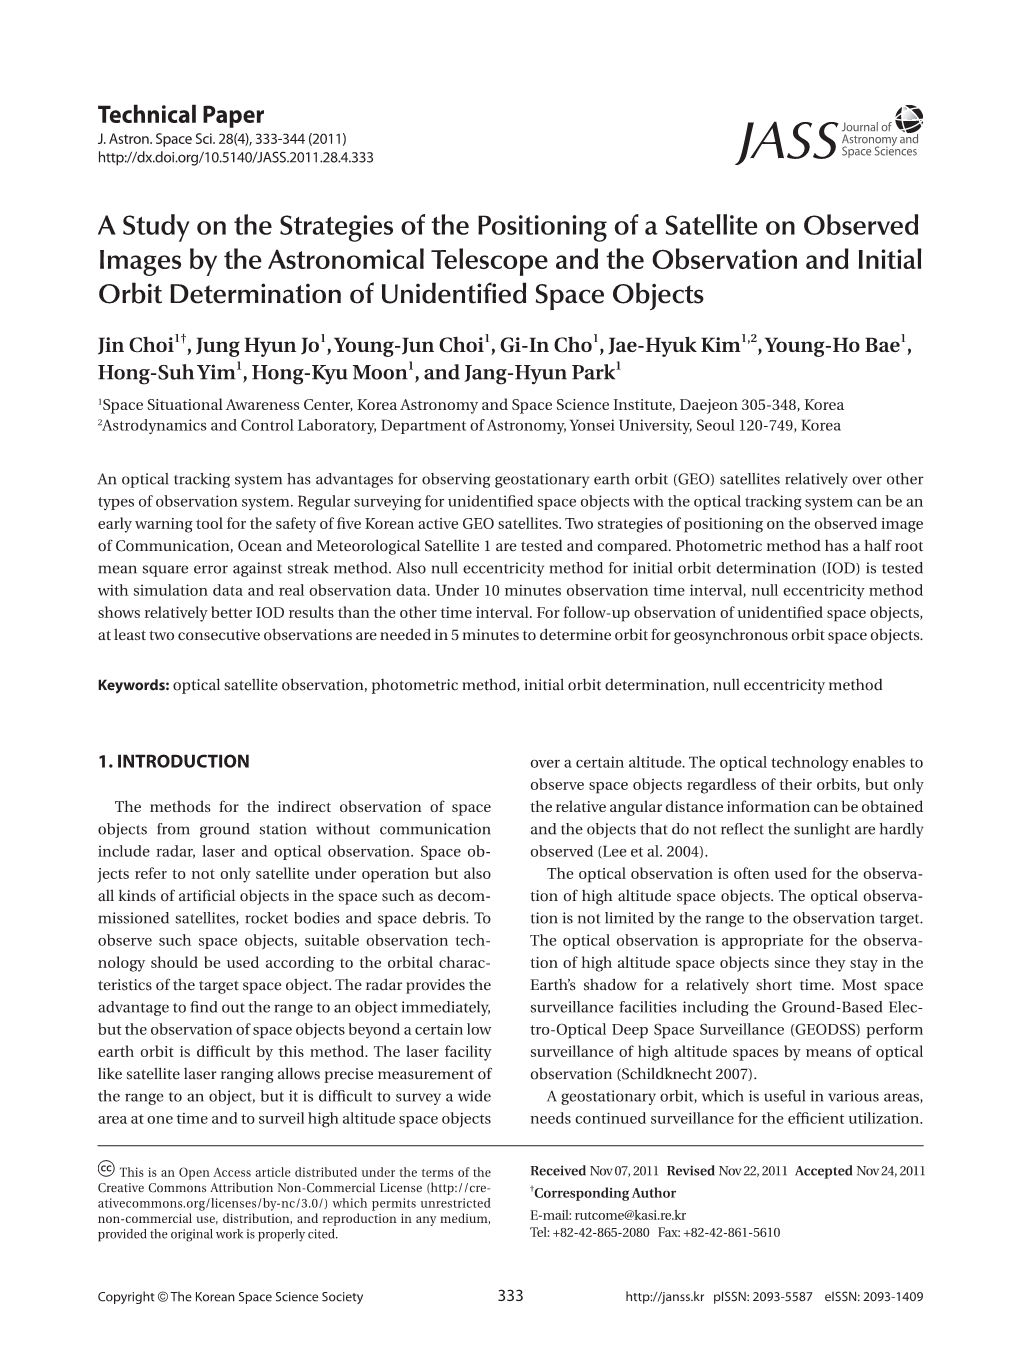 A Study on the Strategies of the Positioning of a Satellite On